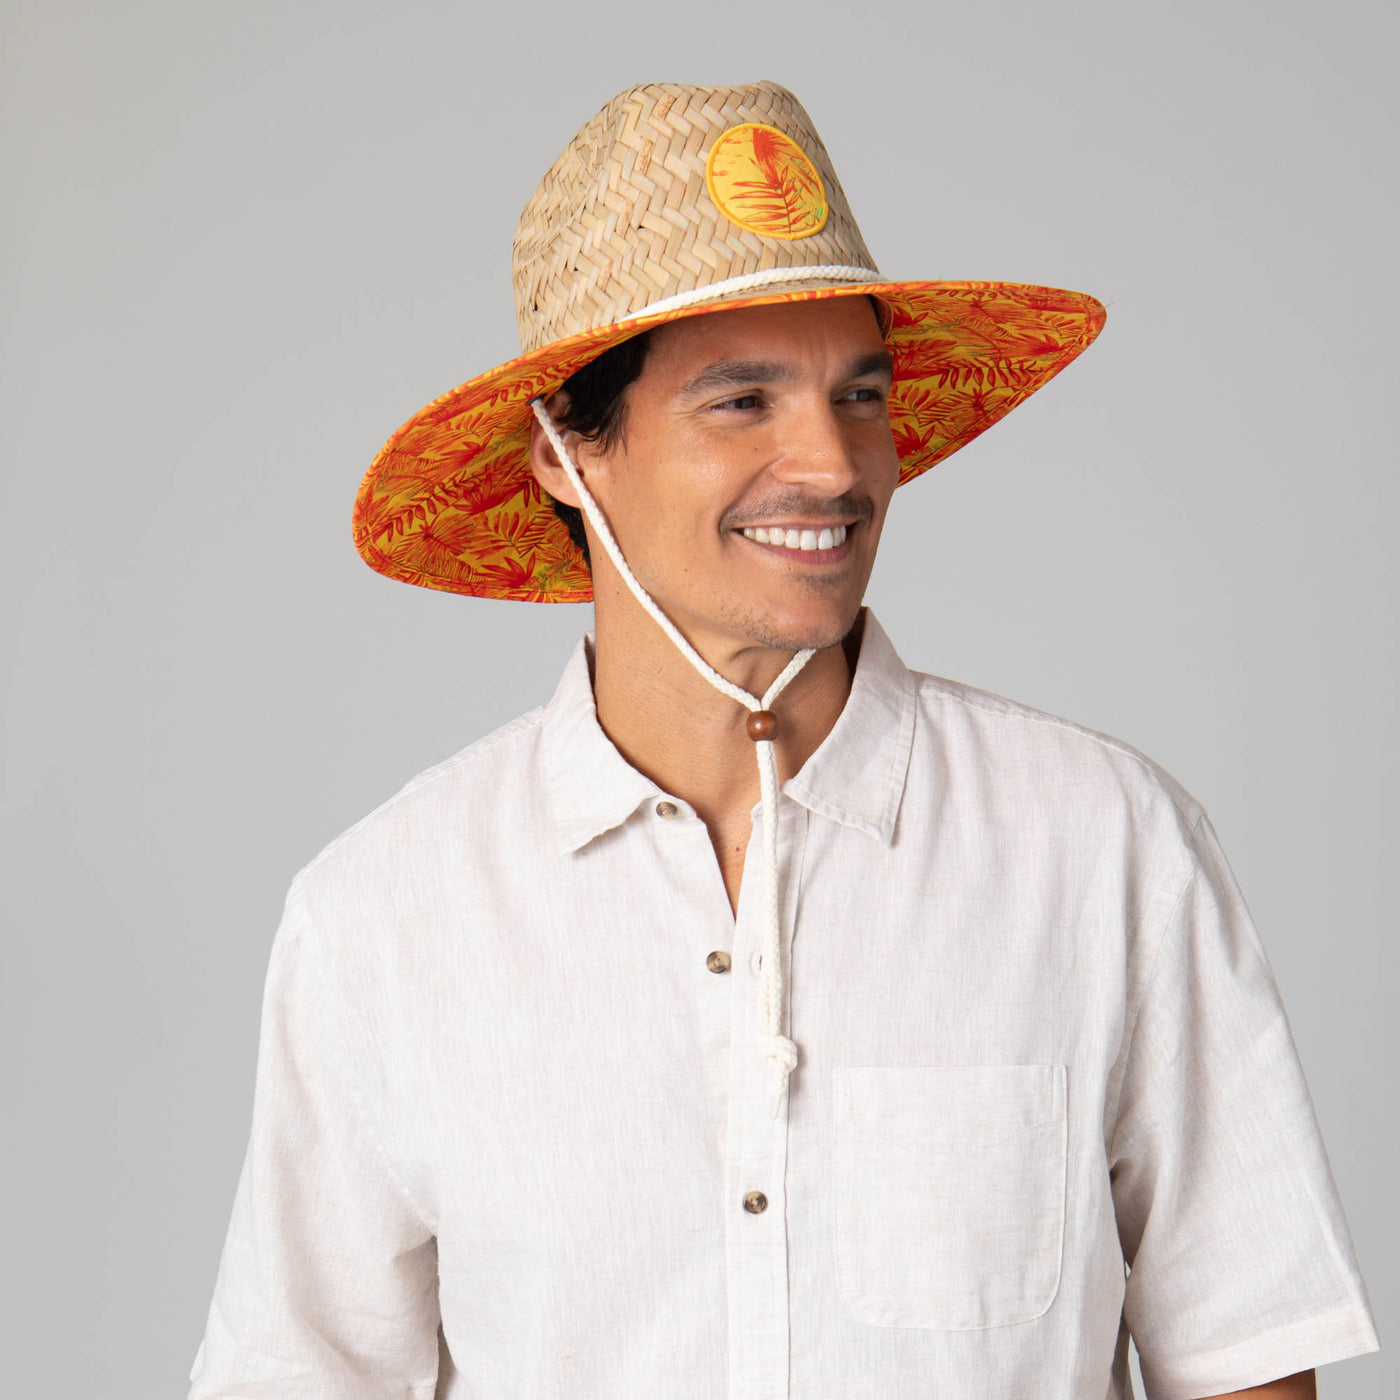 Mens Straw Lifeguard with Tropical Printed Under-brim-LIFEGUARD-San Diego Hat Company